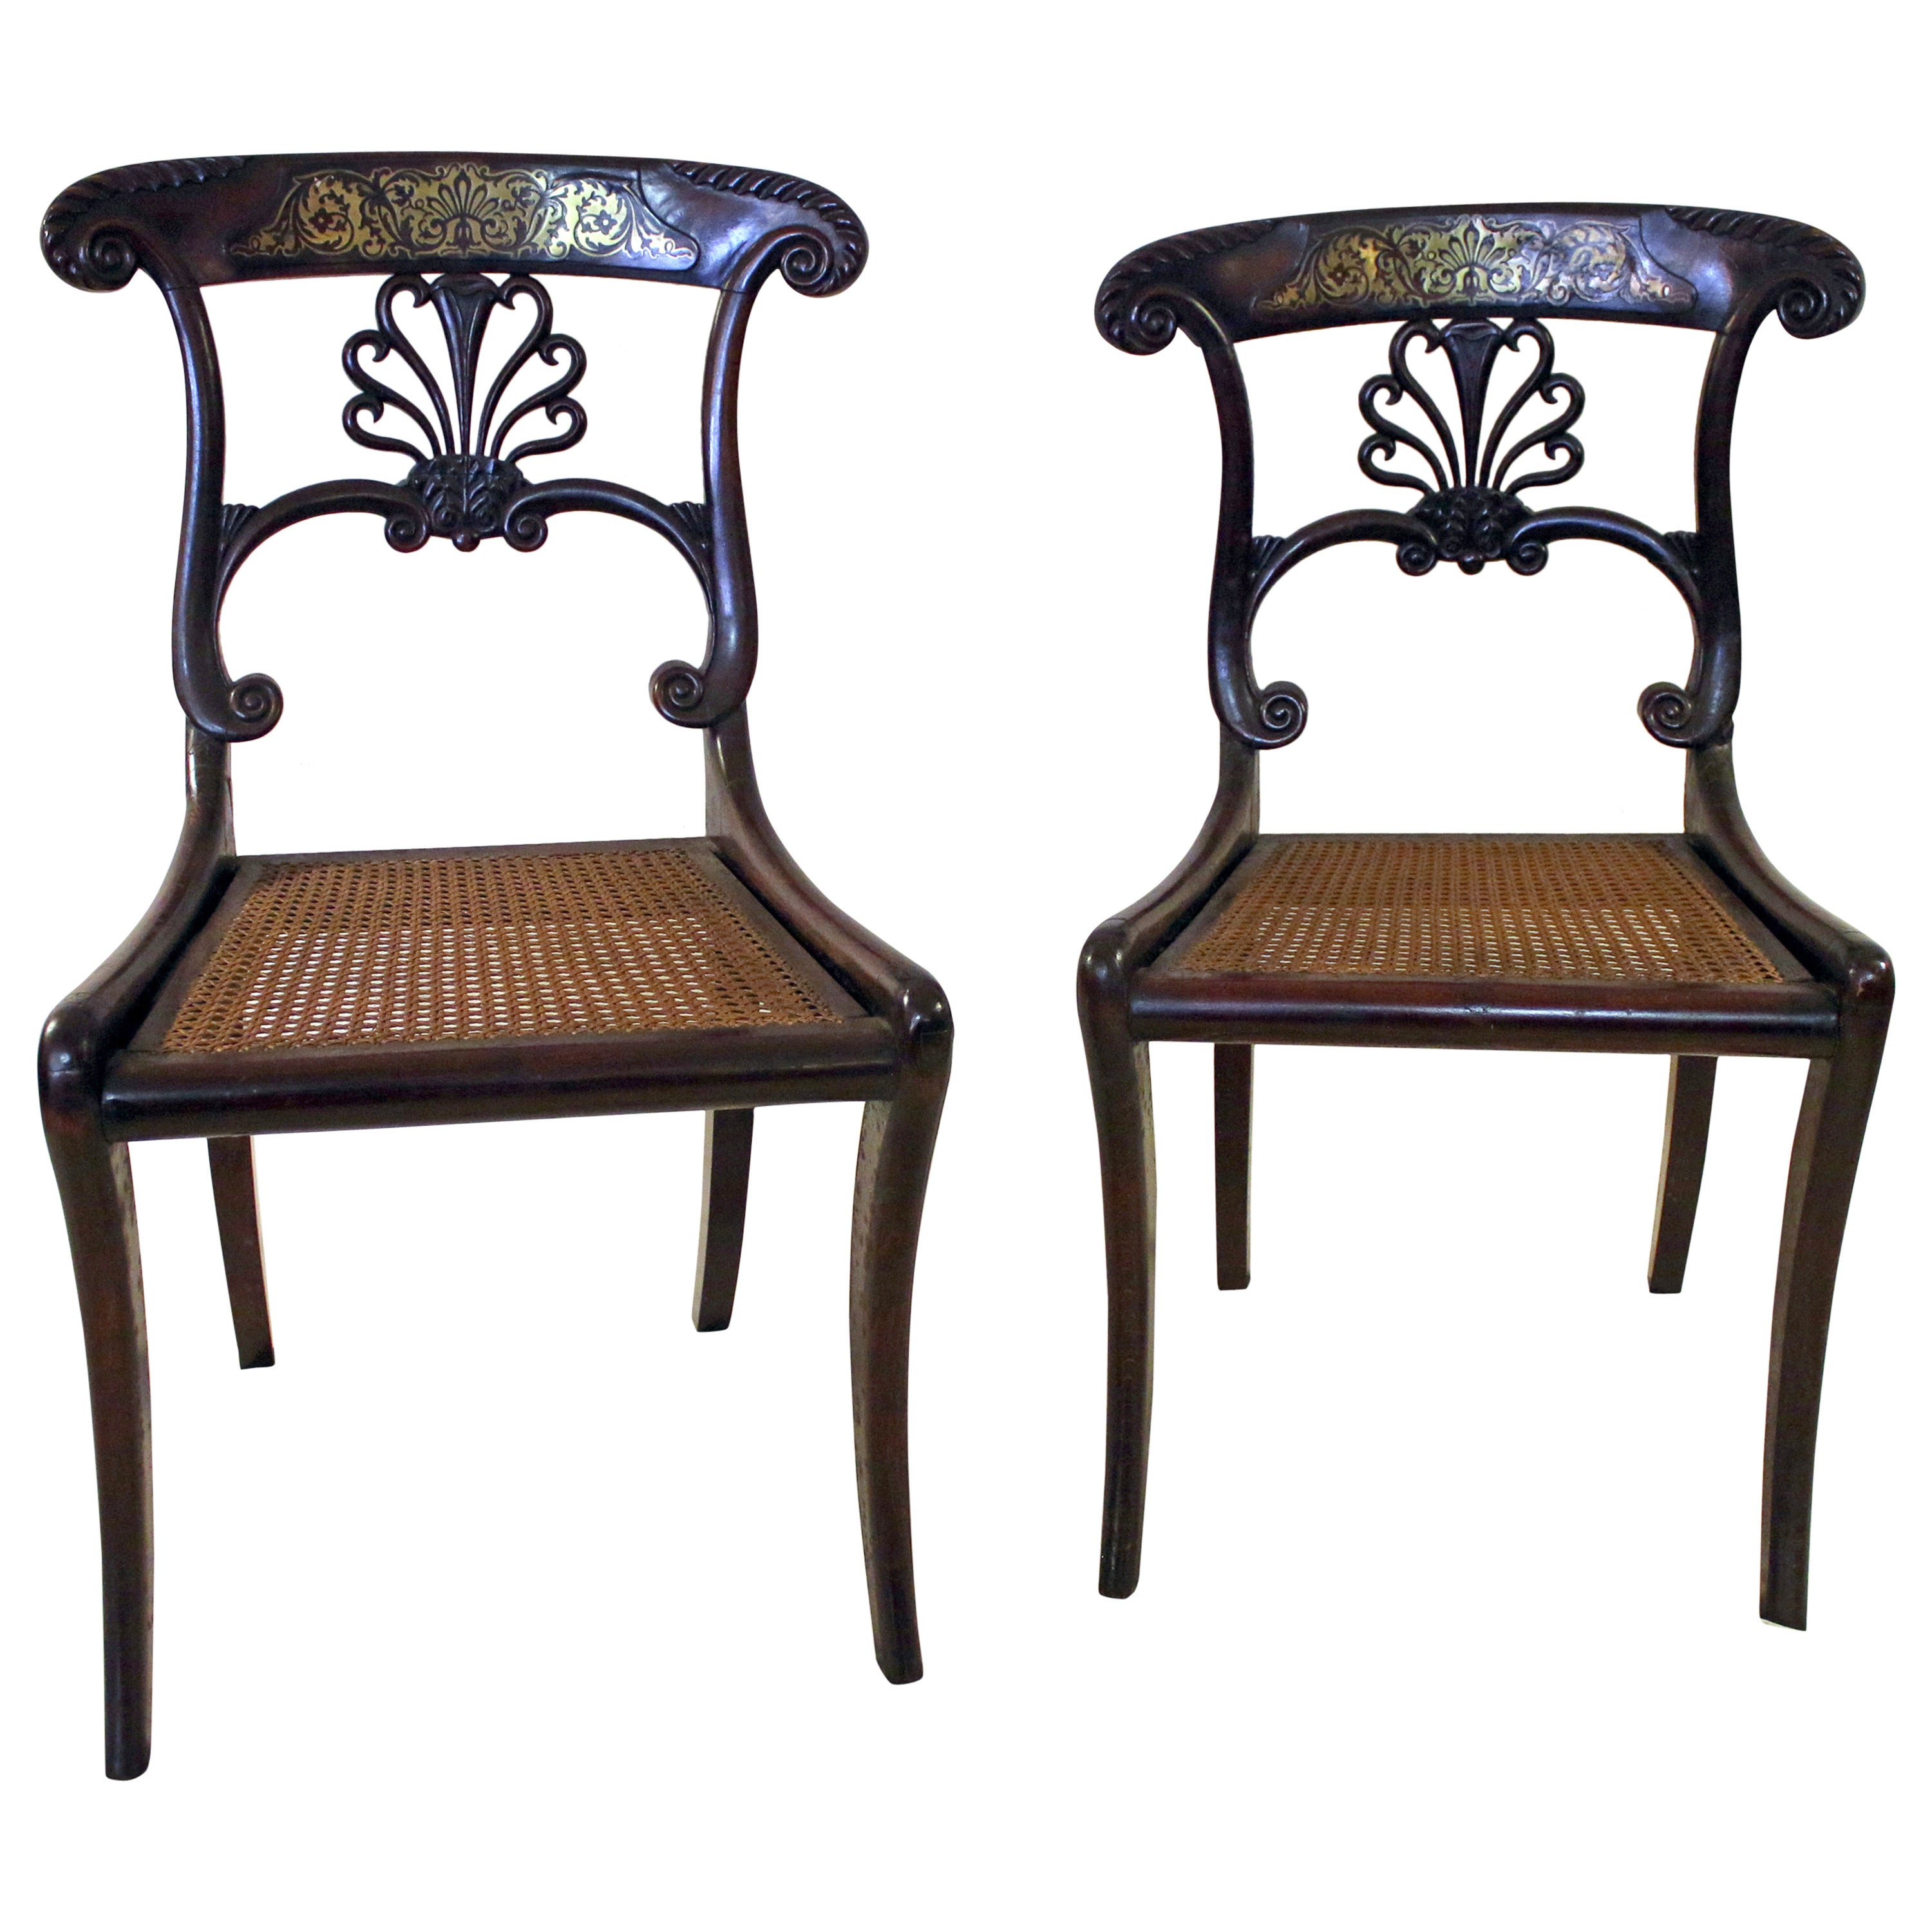 19th century Regency Mahogany Chairs with Boulle Marquetry